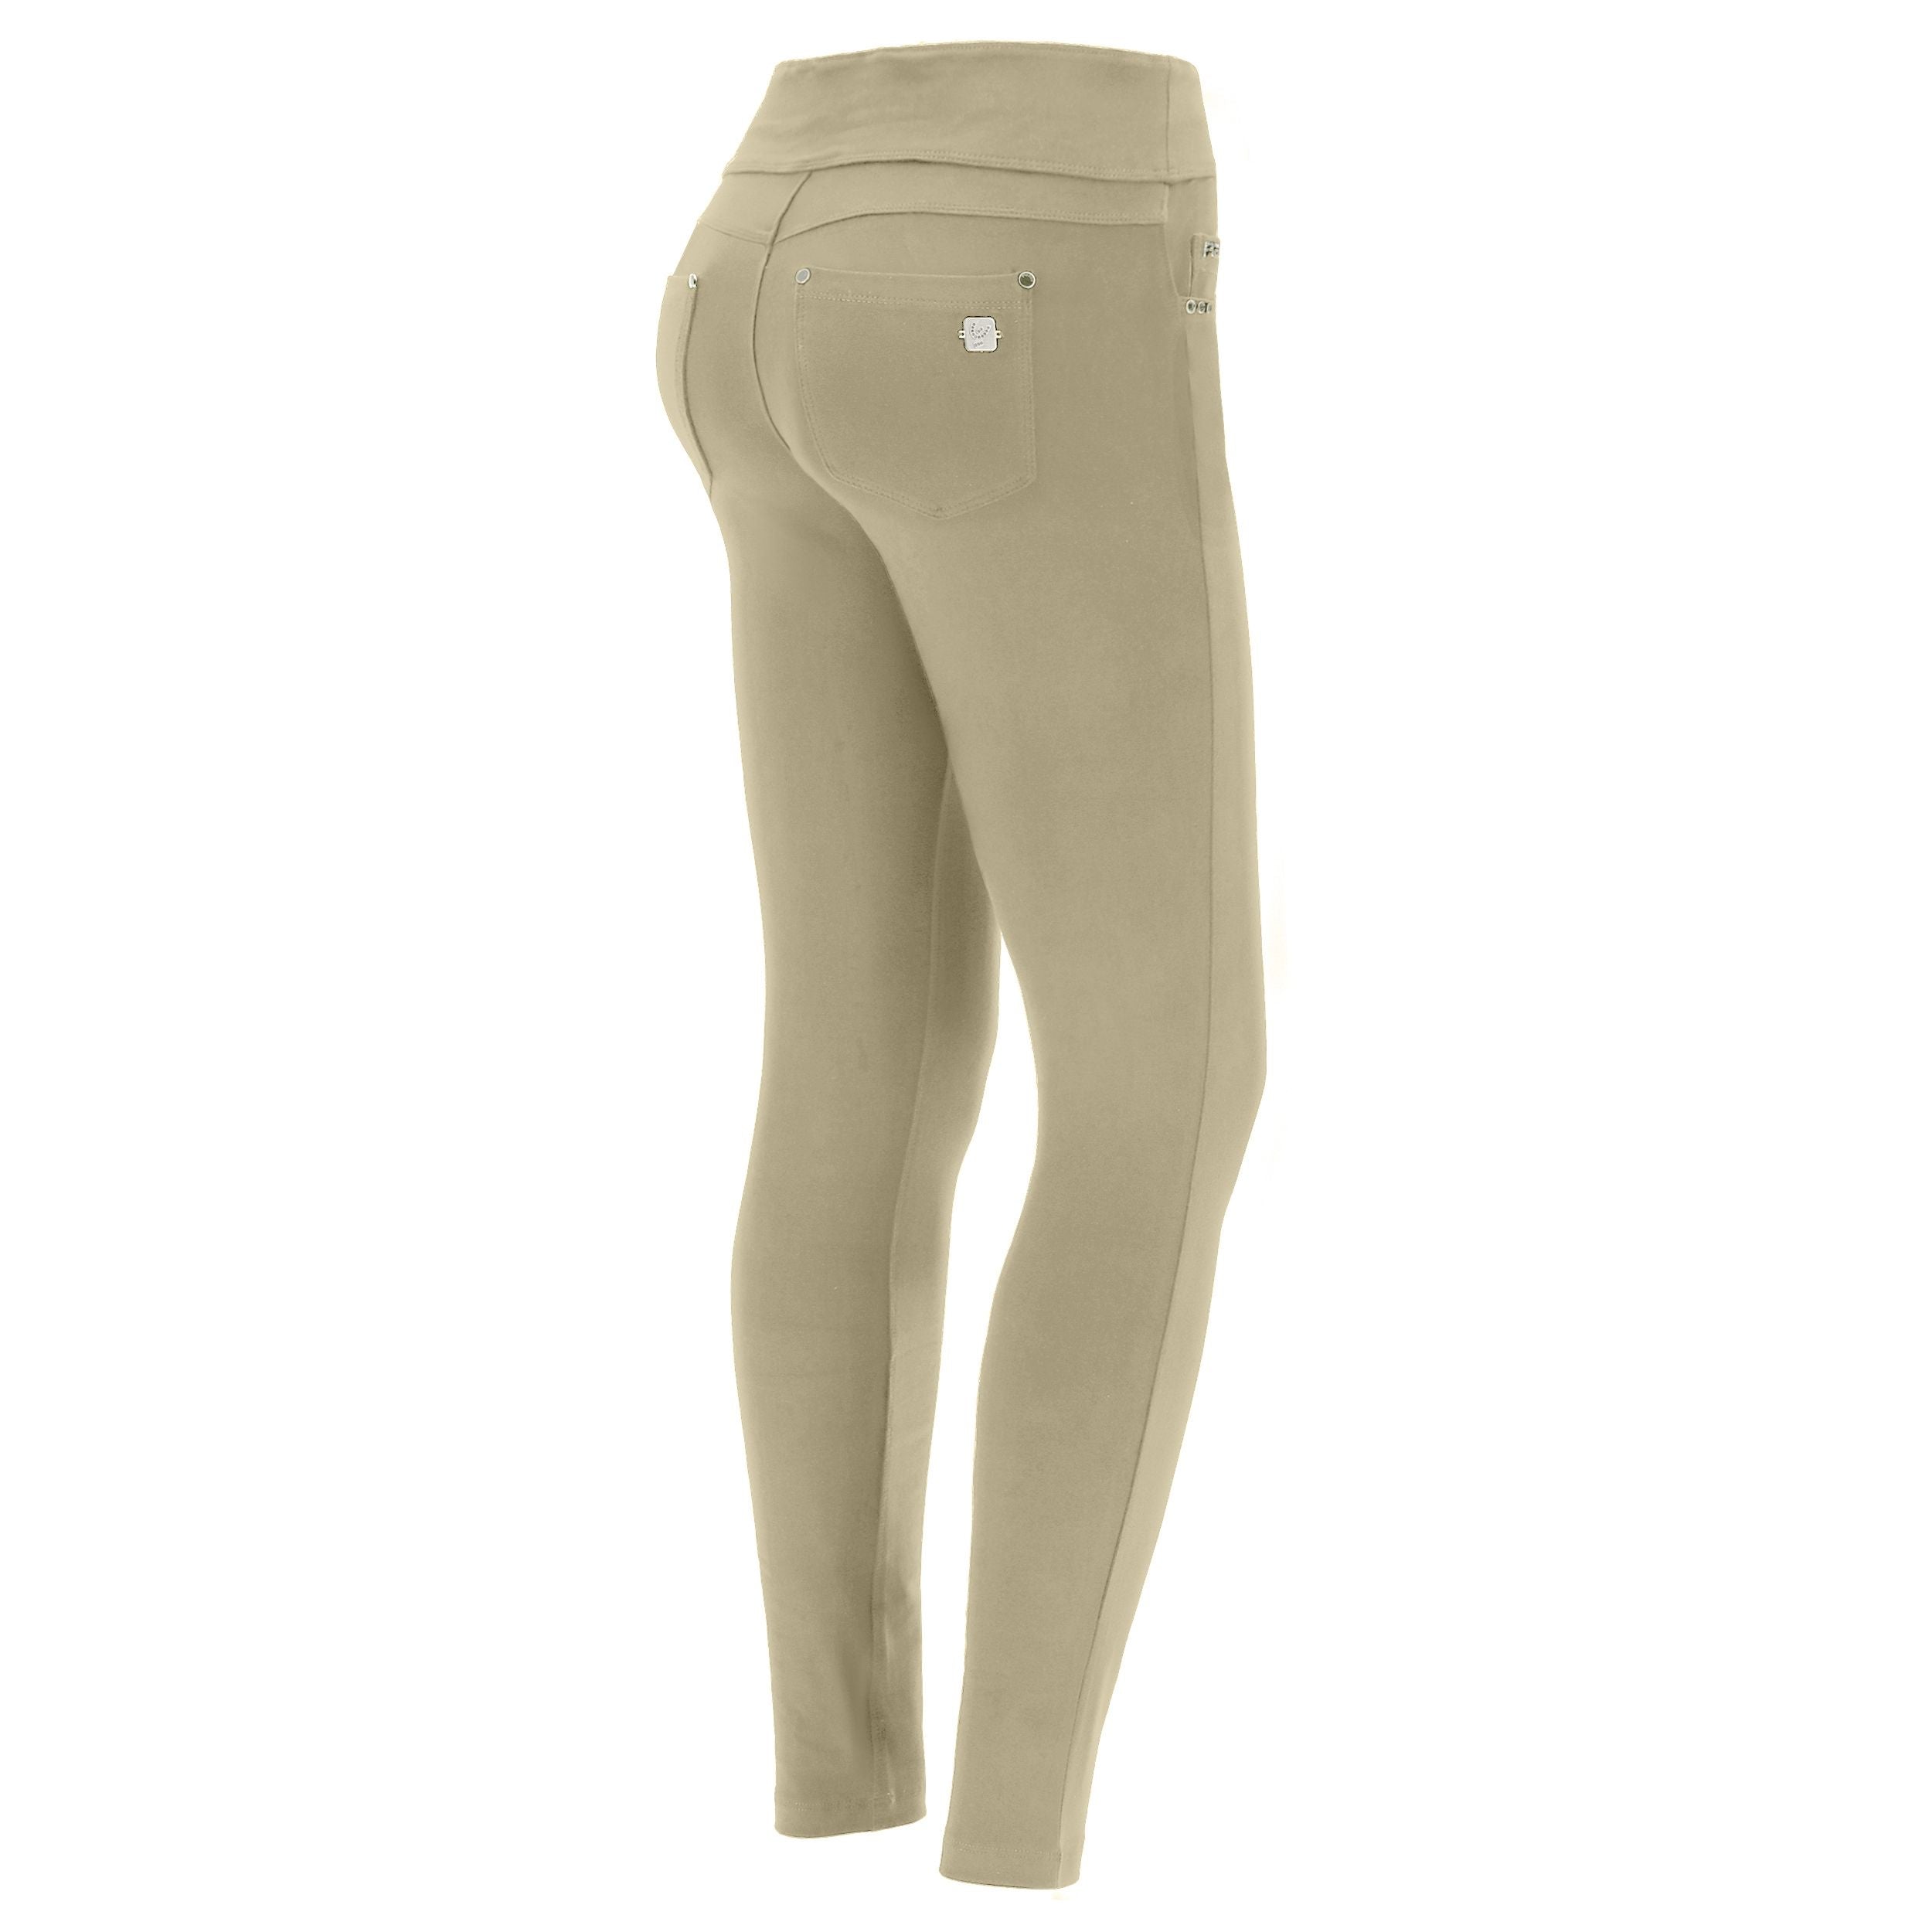 (NOWY1MC001-Z109) Beige Slim-Fit N.O.W.® Cotton Trousers With A Foldable Waist